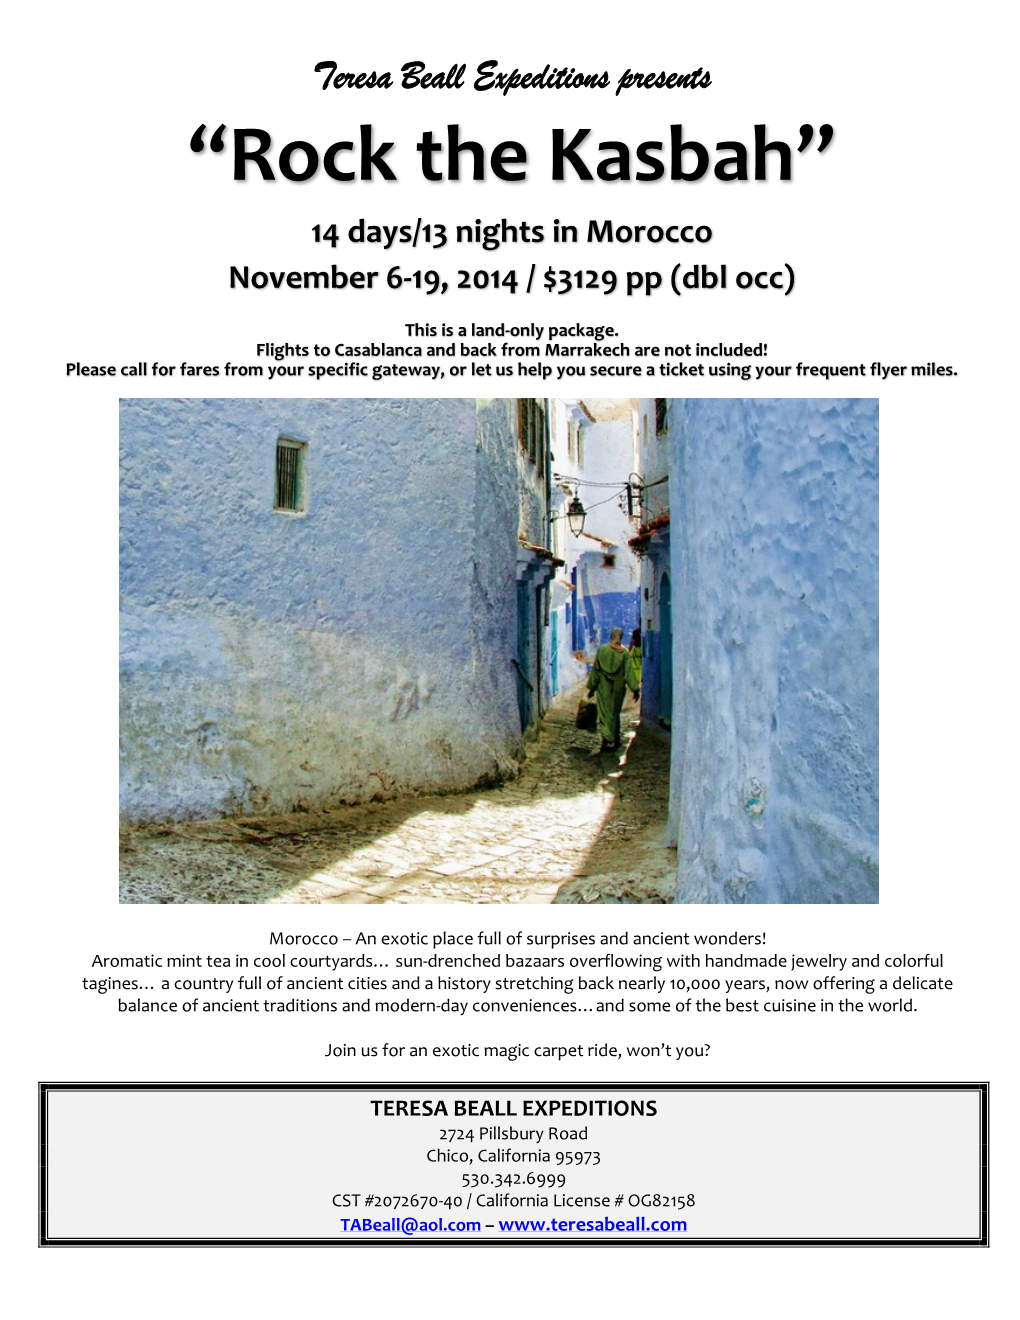 “Rock the Kasbah” 14 Days/13 Nights in Morocco